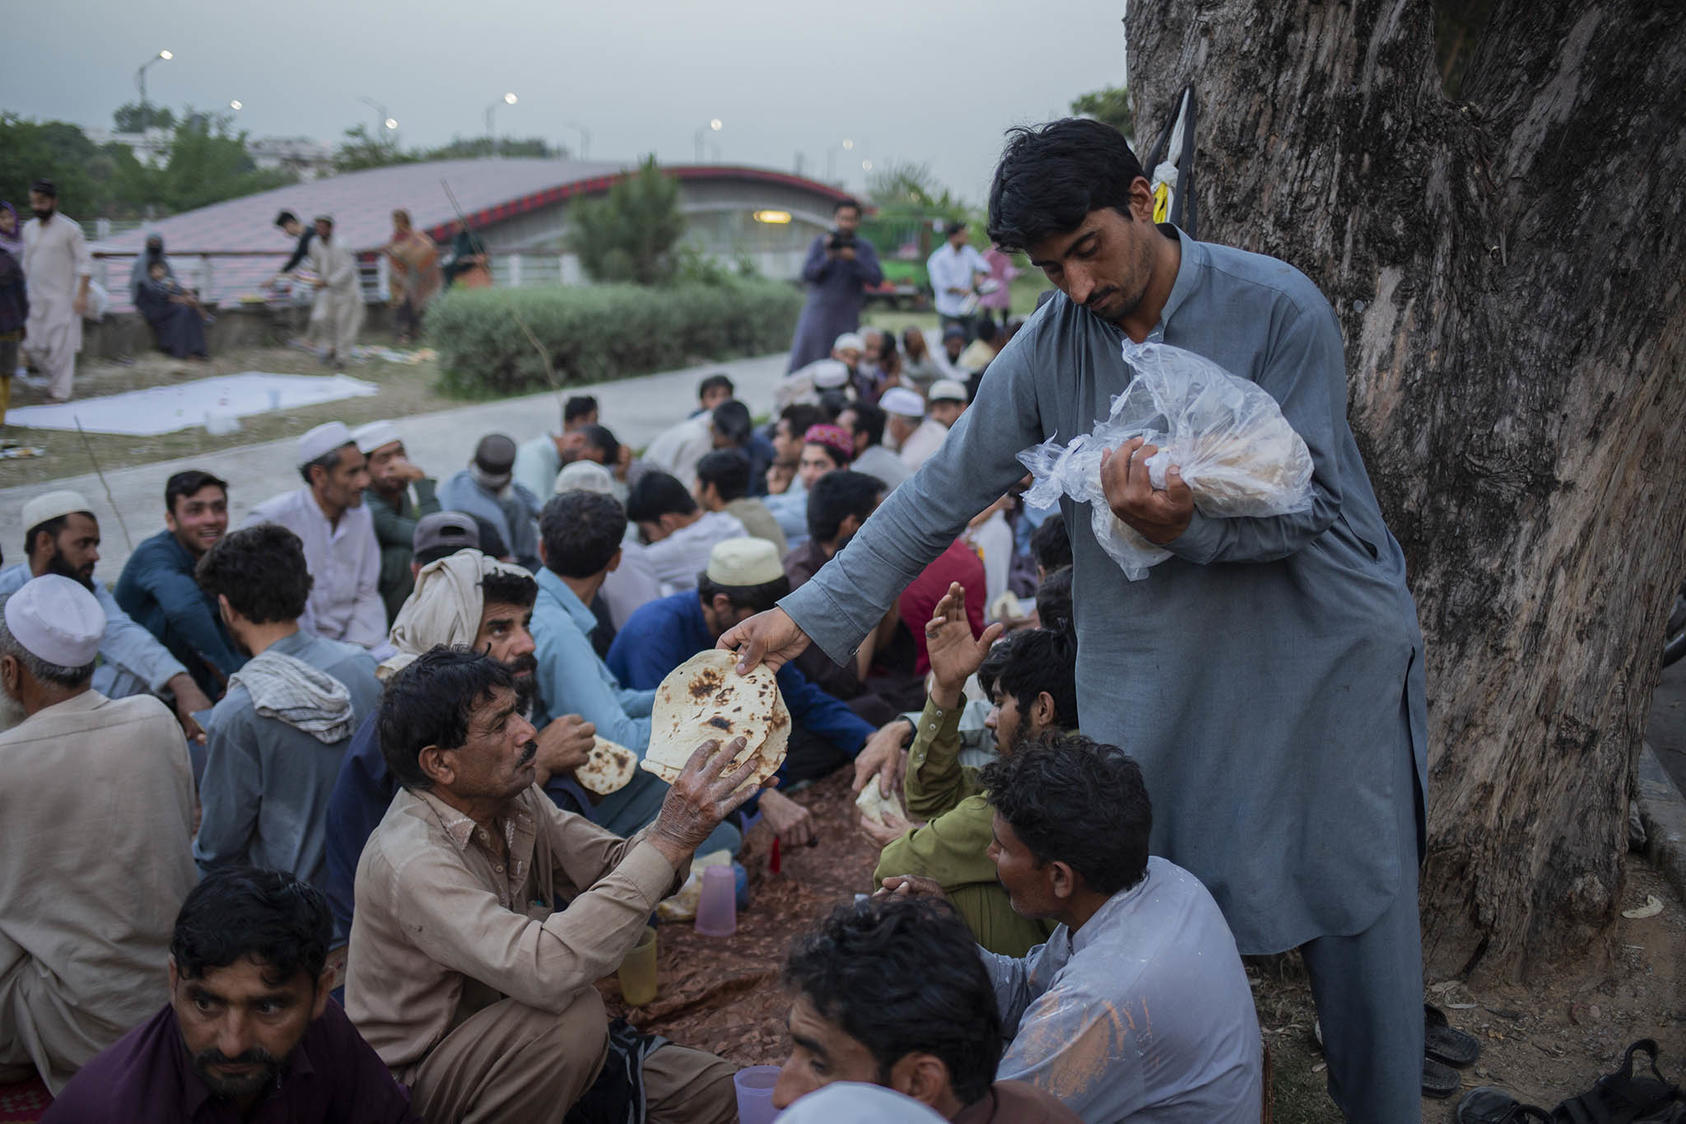 Volunteers distribute bread for people to break their fast during the Muslim holy month of Ramadan in Islamabad, Pakistan, on April 15, 2023. (Saiyna Bashir/The New York Times)